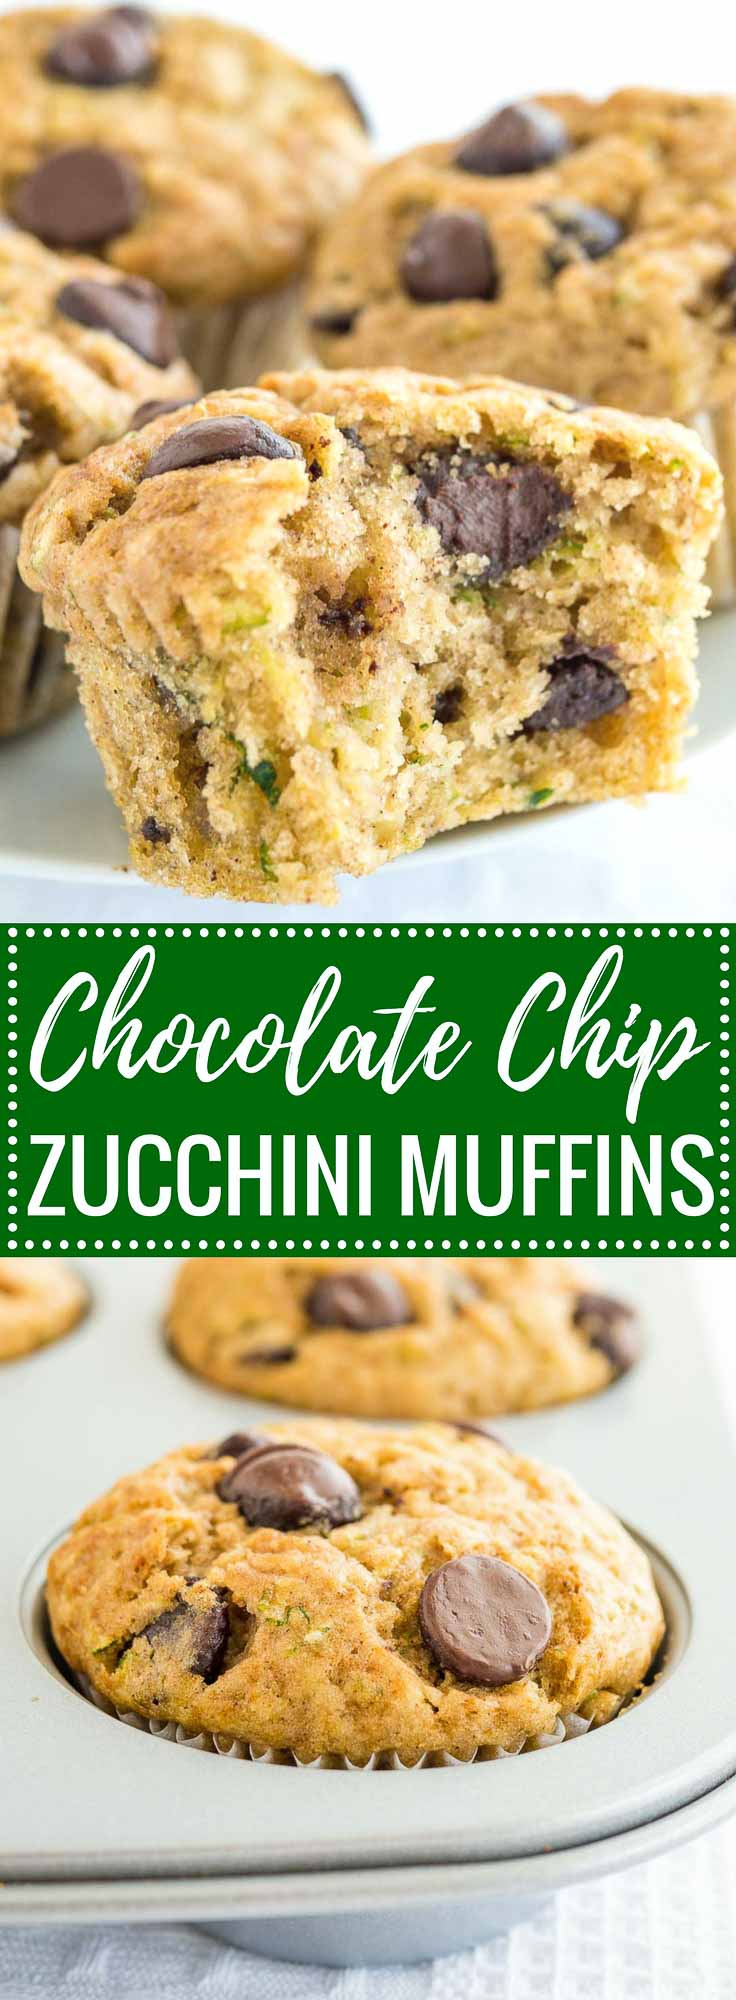 Two images with text: Chocolate chip zucchini muffins, top: Close up of zucchini chocolate chip muffins on a white plate. The frontmost muffin has had a big bite taken out of it. Bottom: A grey muffin pan with zucchini chocolate chip muffins.